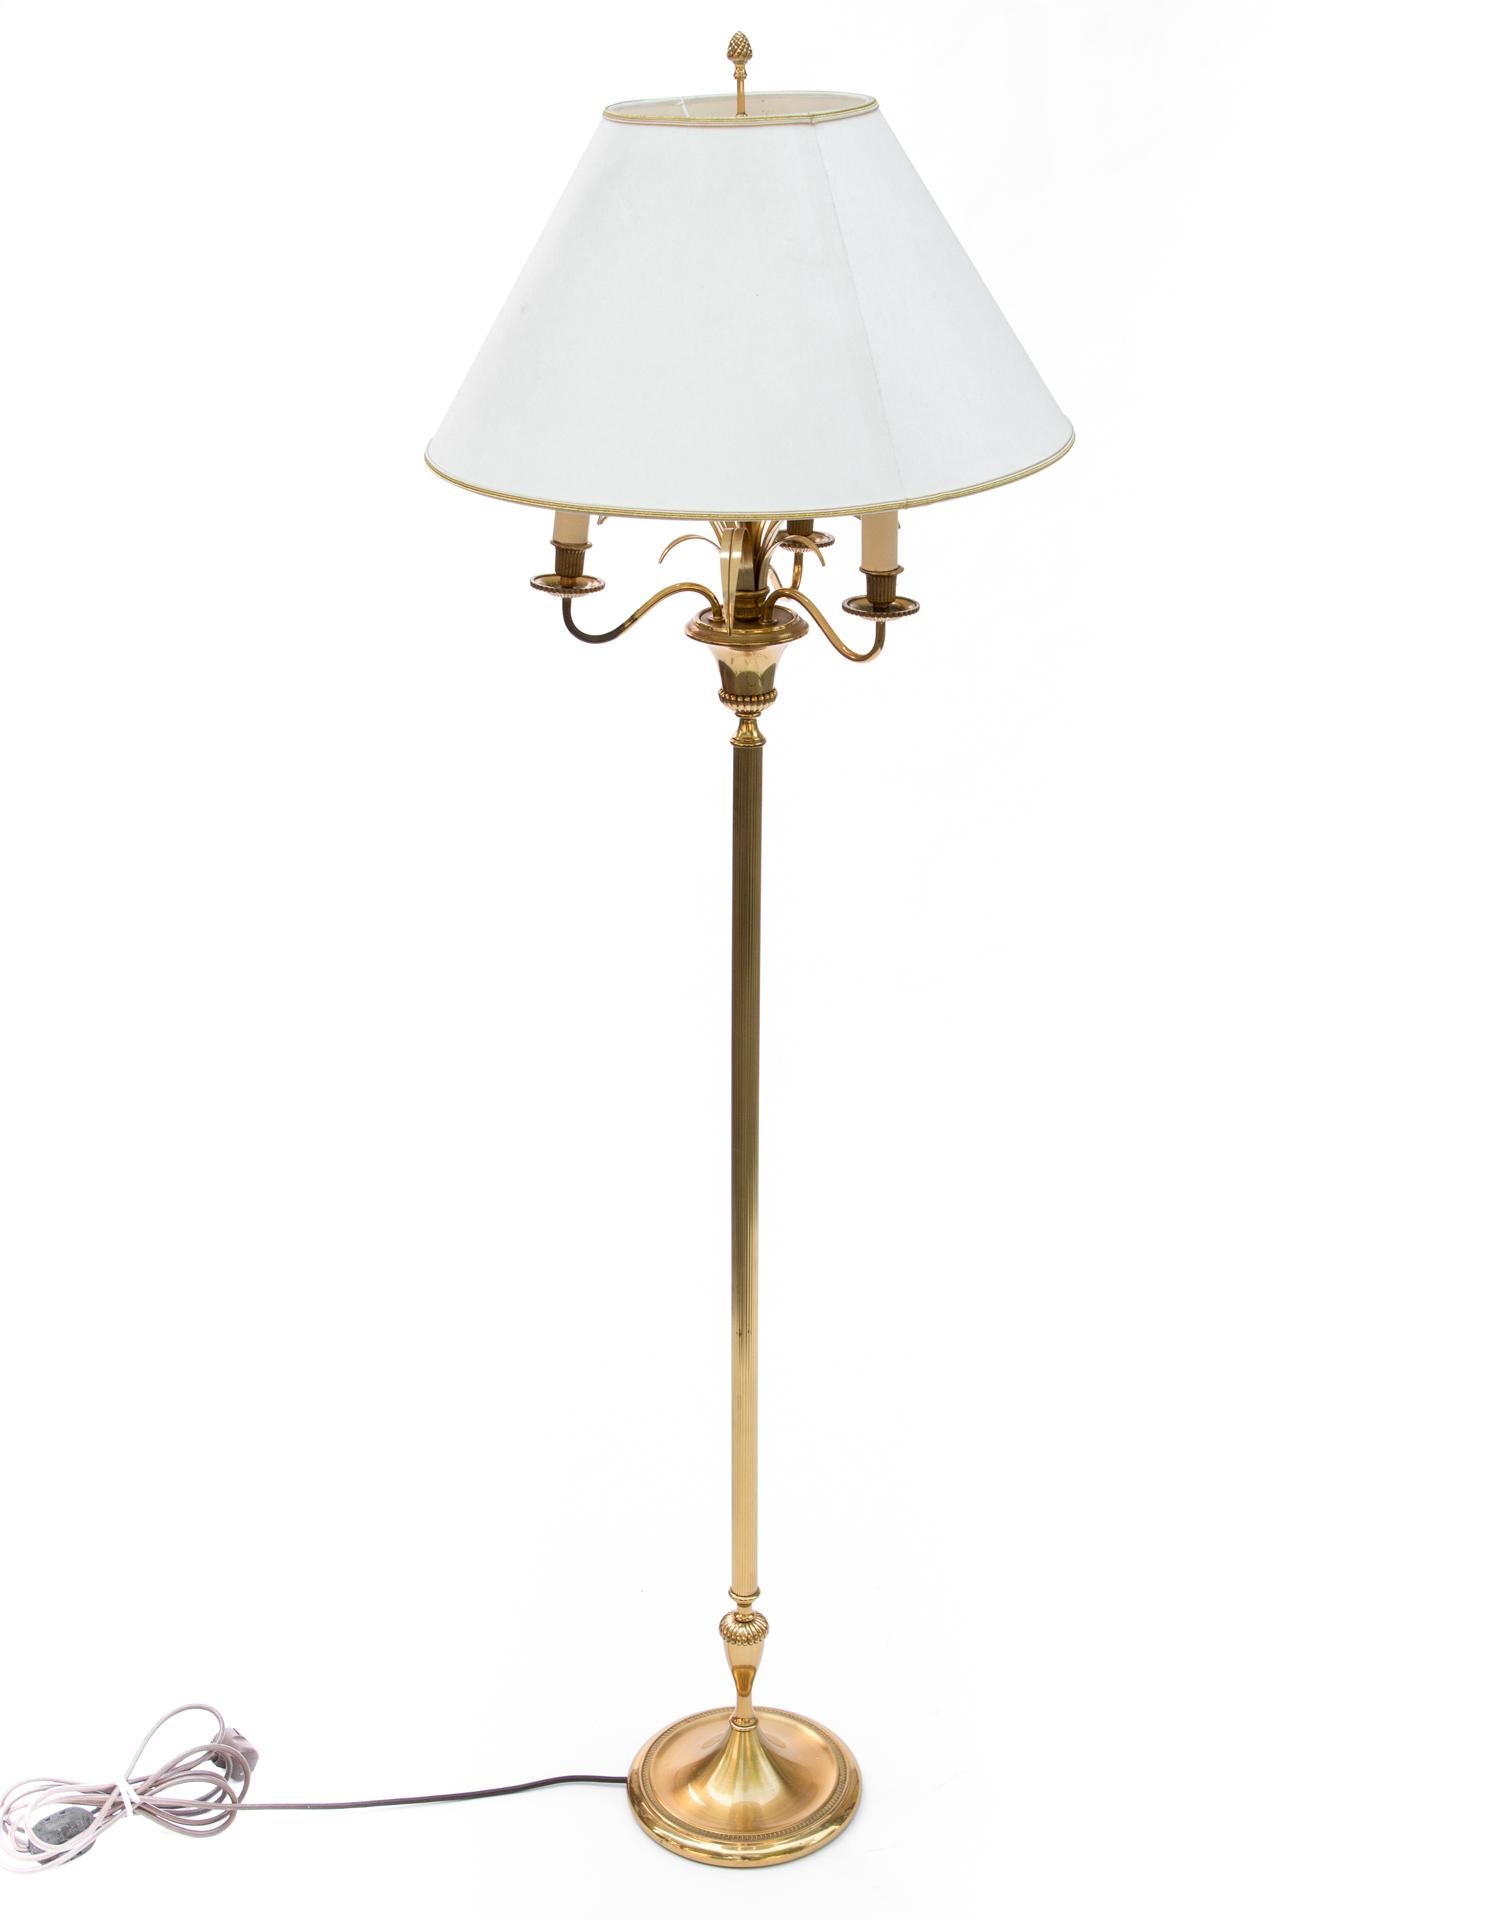 Floor lamp of the exclusive French brand Maison Jansen. Made of high quality chiseled brass.

The lamp stands on a round, smooth base with a frieze decorated with tiny fringes. The stem is long, slender, cannelized. A decorative perk holds a